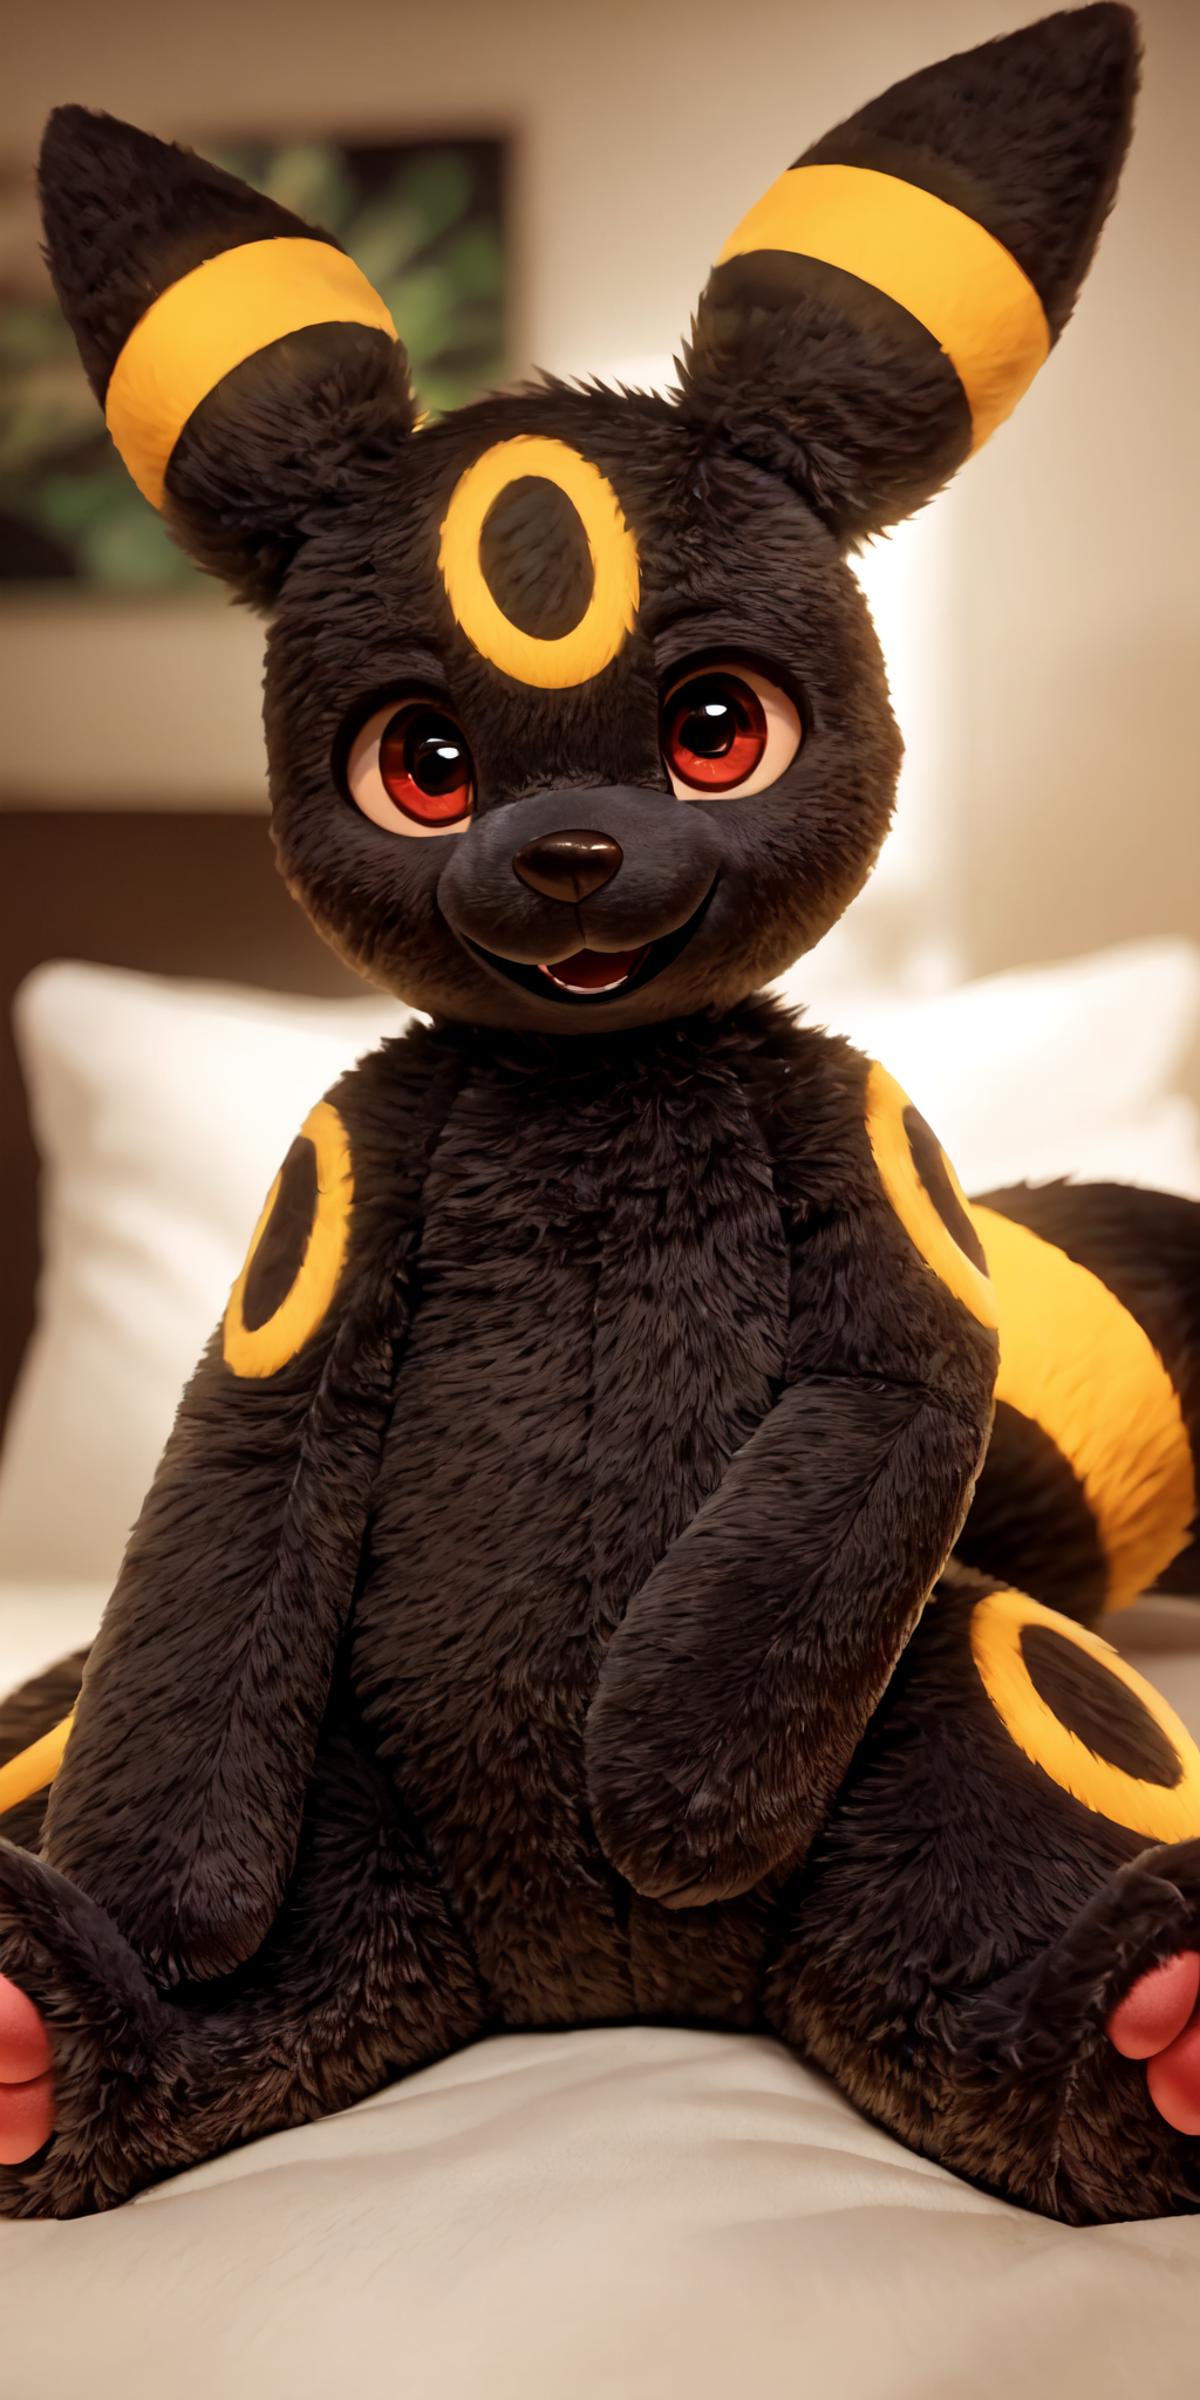 A black and yellow stuffed animal sitting on a bed.